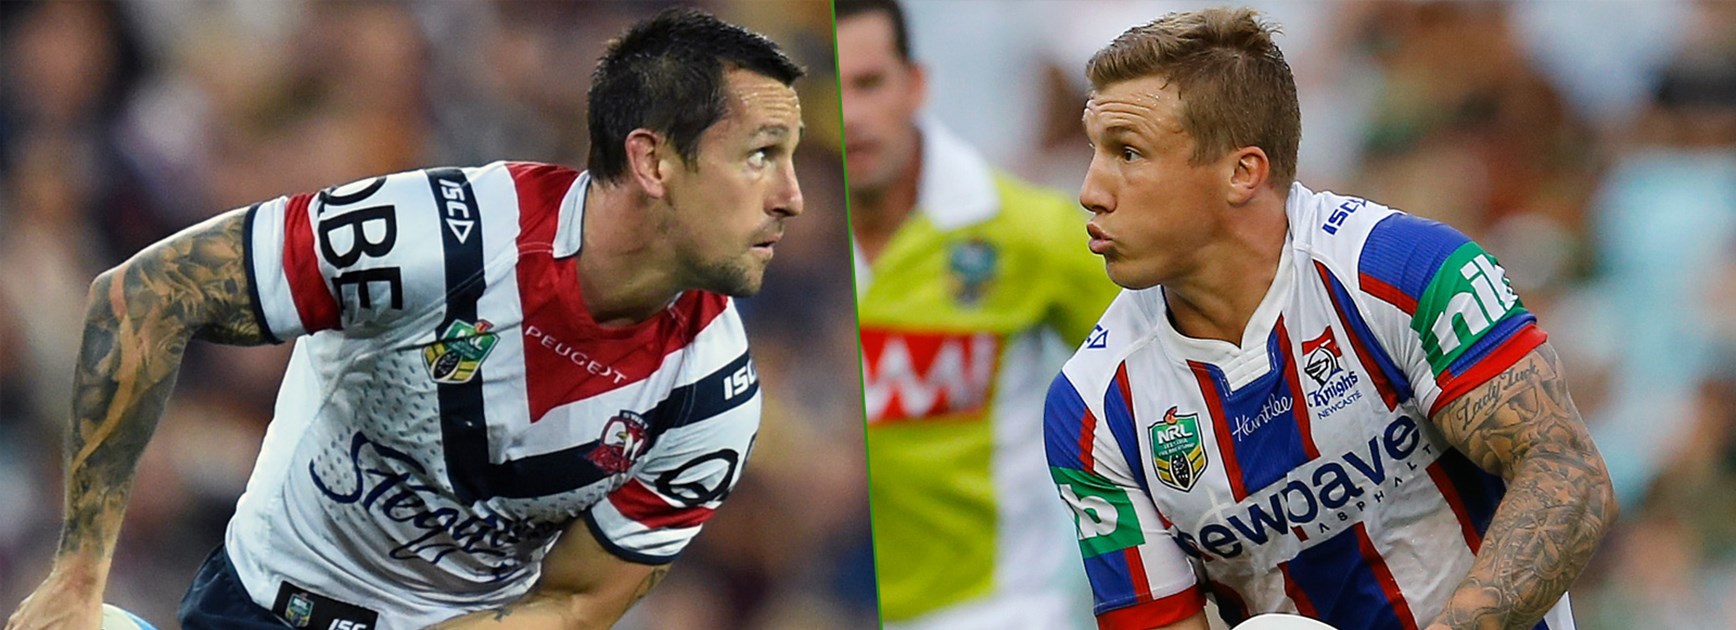 Returning Roosters halfback Mitchell Pearce will line up against his old NSW Origin halves partner Trent Hodkinson this week.